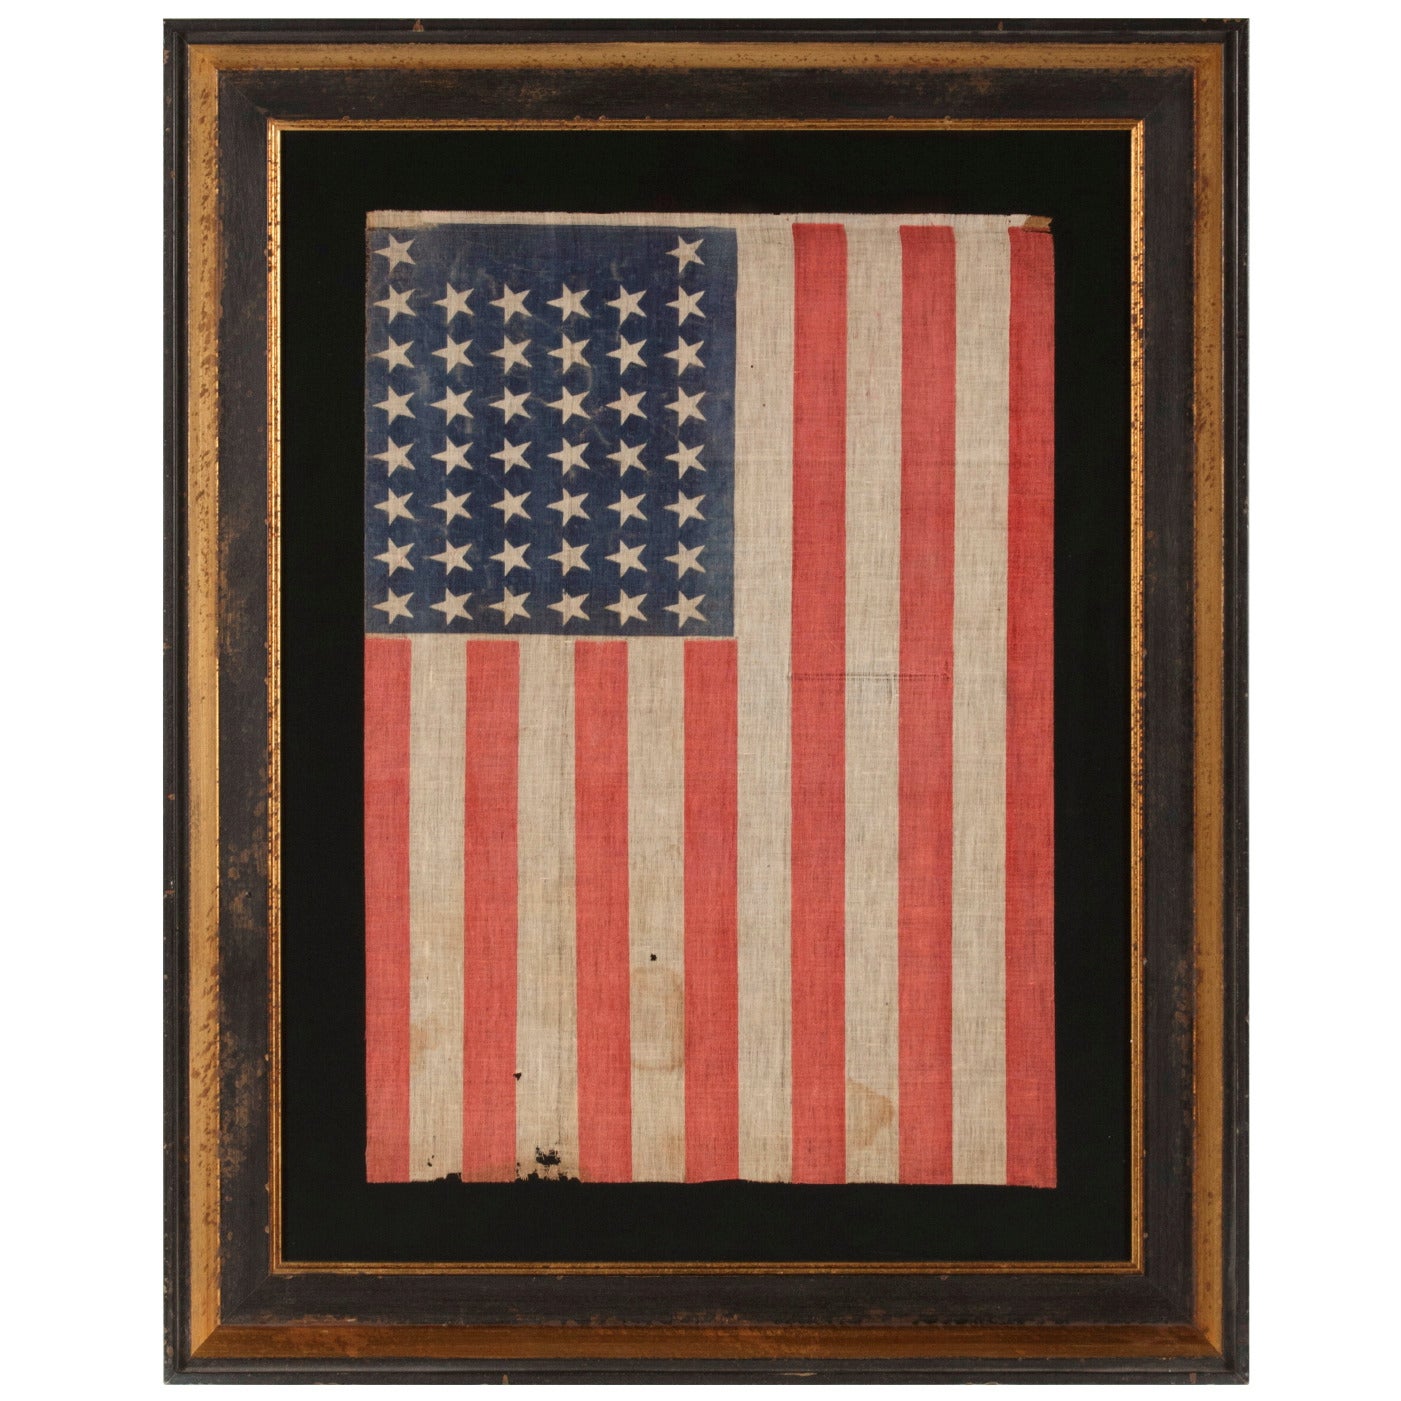 44 Stars Flag with "Notched" Pattern Stars